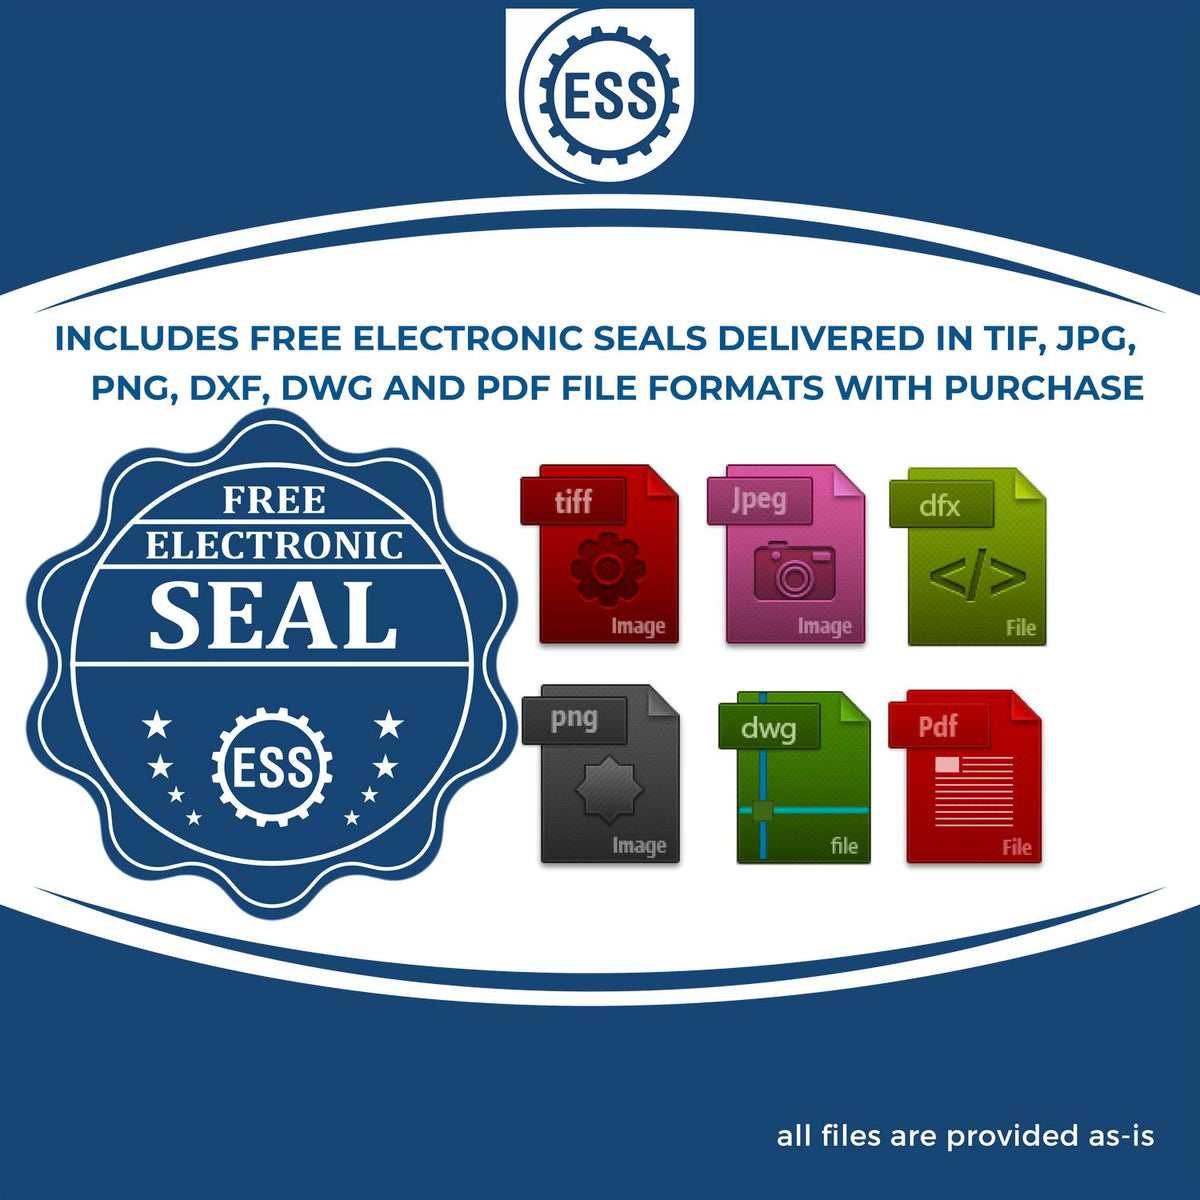 An infographic for the free electronic seal for the Slim Pre-Inked Florida Landscape Architect Seal Stamp illustrating the different file type icons such as DXF, DWG, TIF, JPG and PNG.